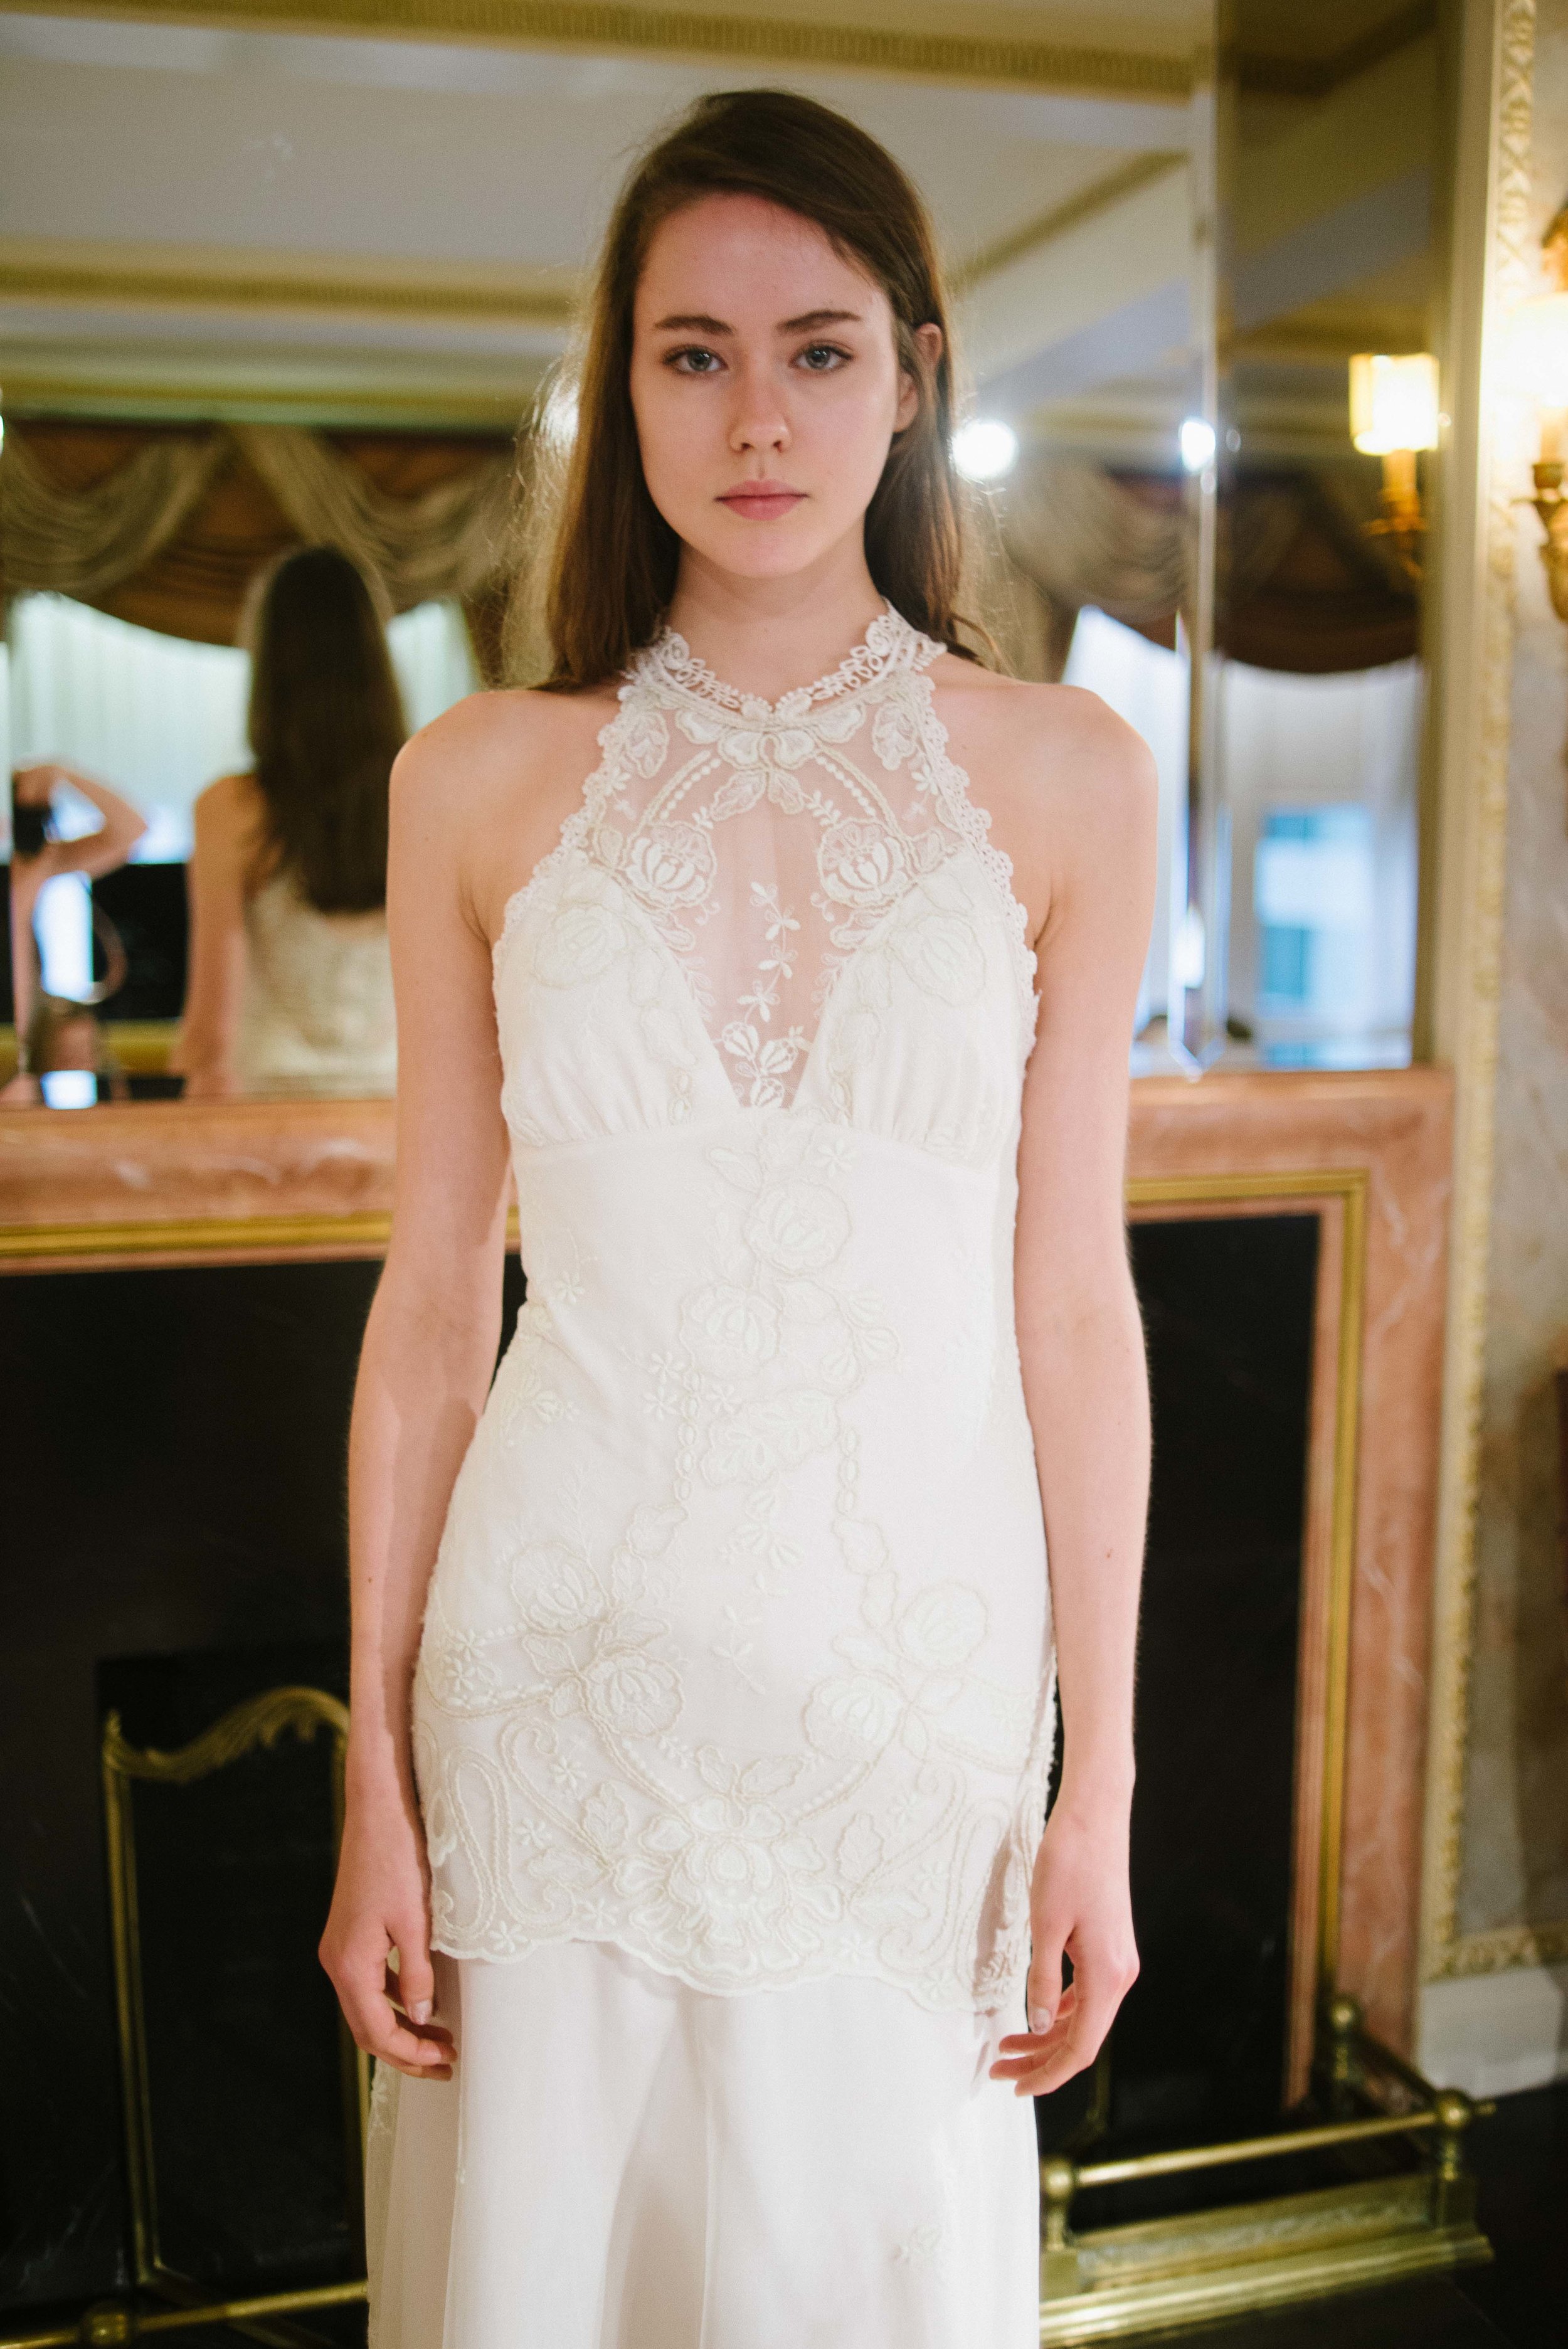  New York Bridal Fashion Week 2016 | Claire Pettibone Couture, "The Four Seasons Collection" | Available at Little White Dress Bridal Shop in Denver 